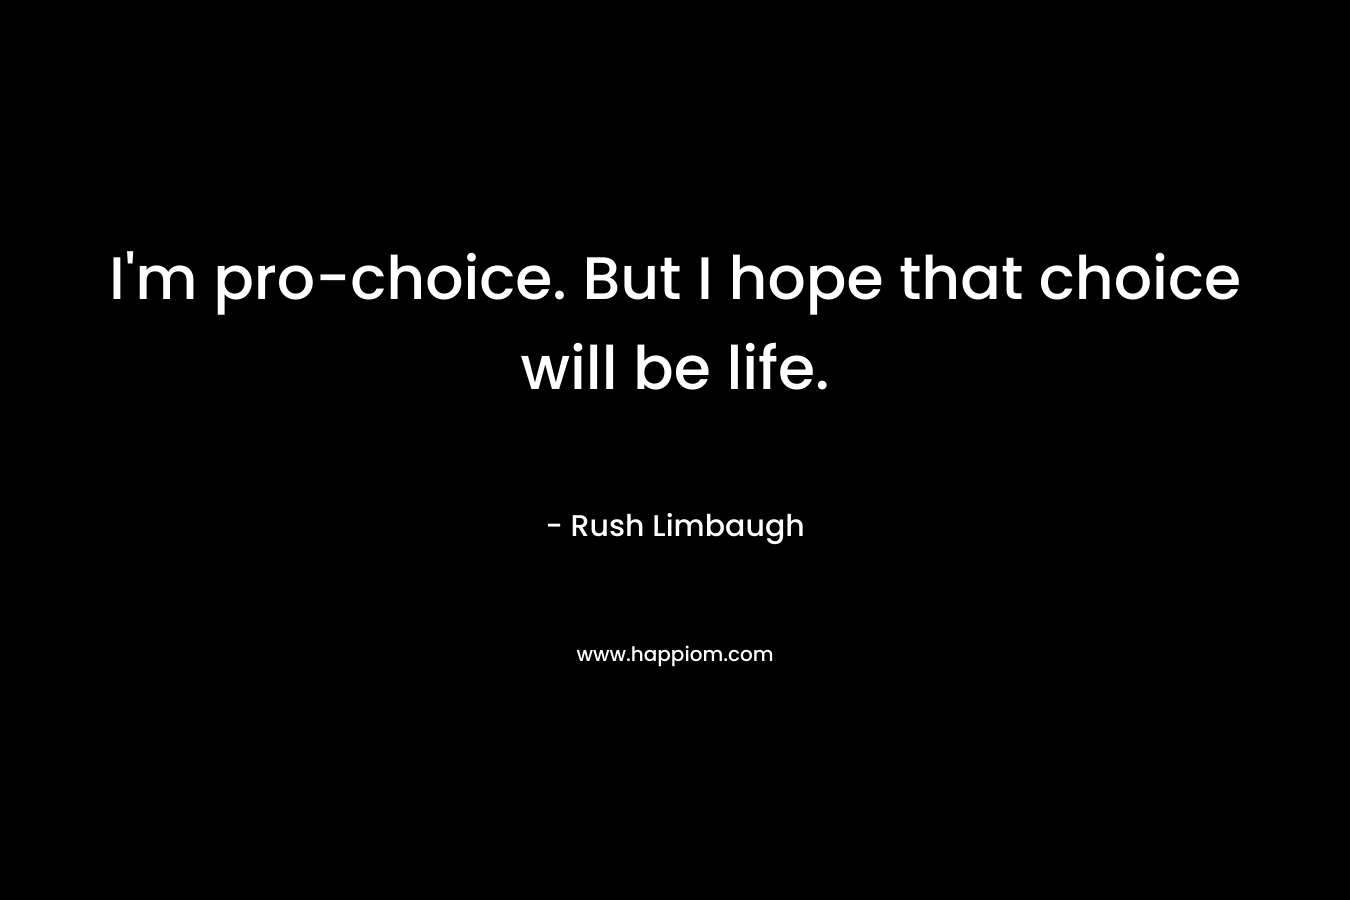 I’m pro-choice. But I hope that choice will be life. – Rush Limbaugh